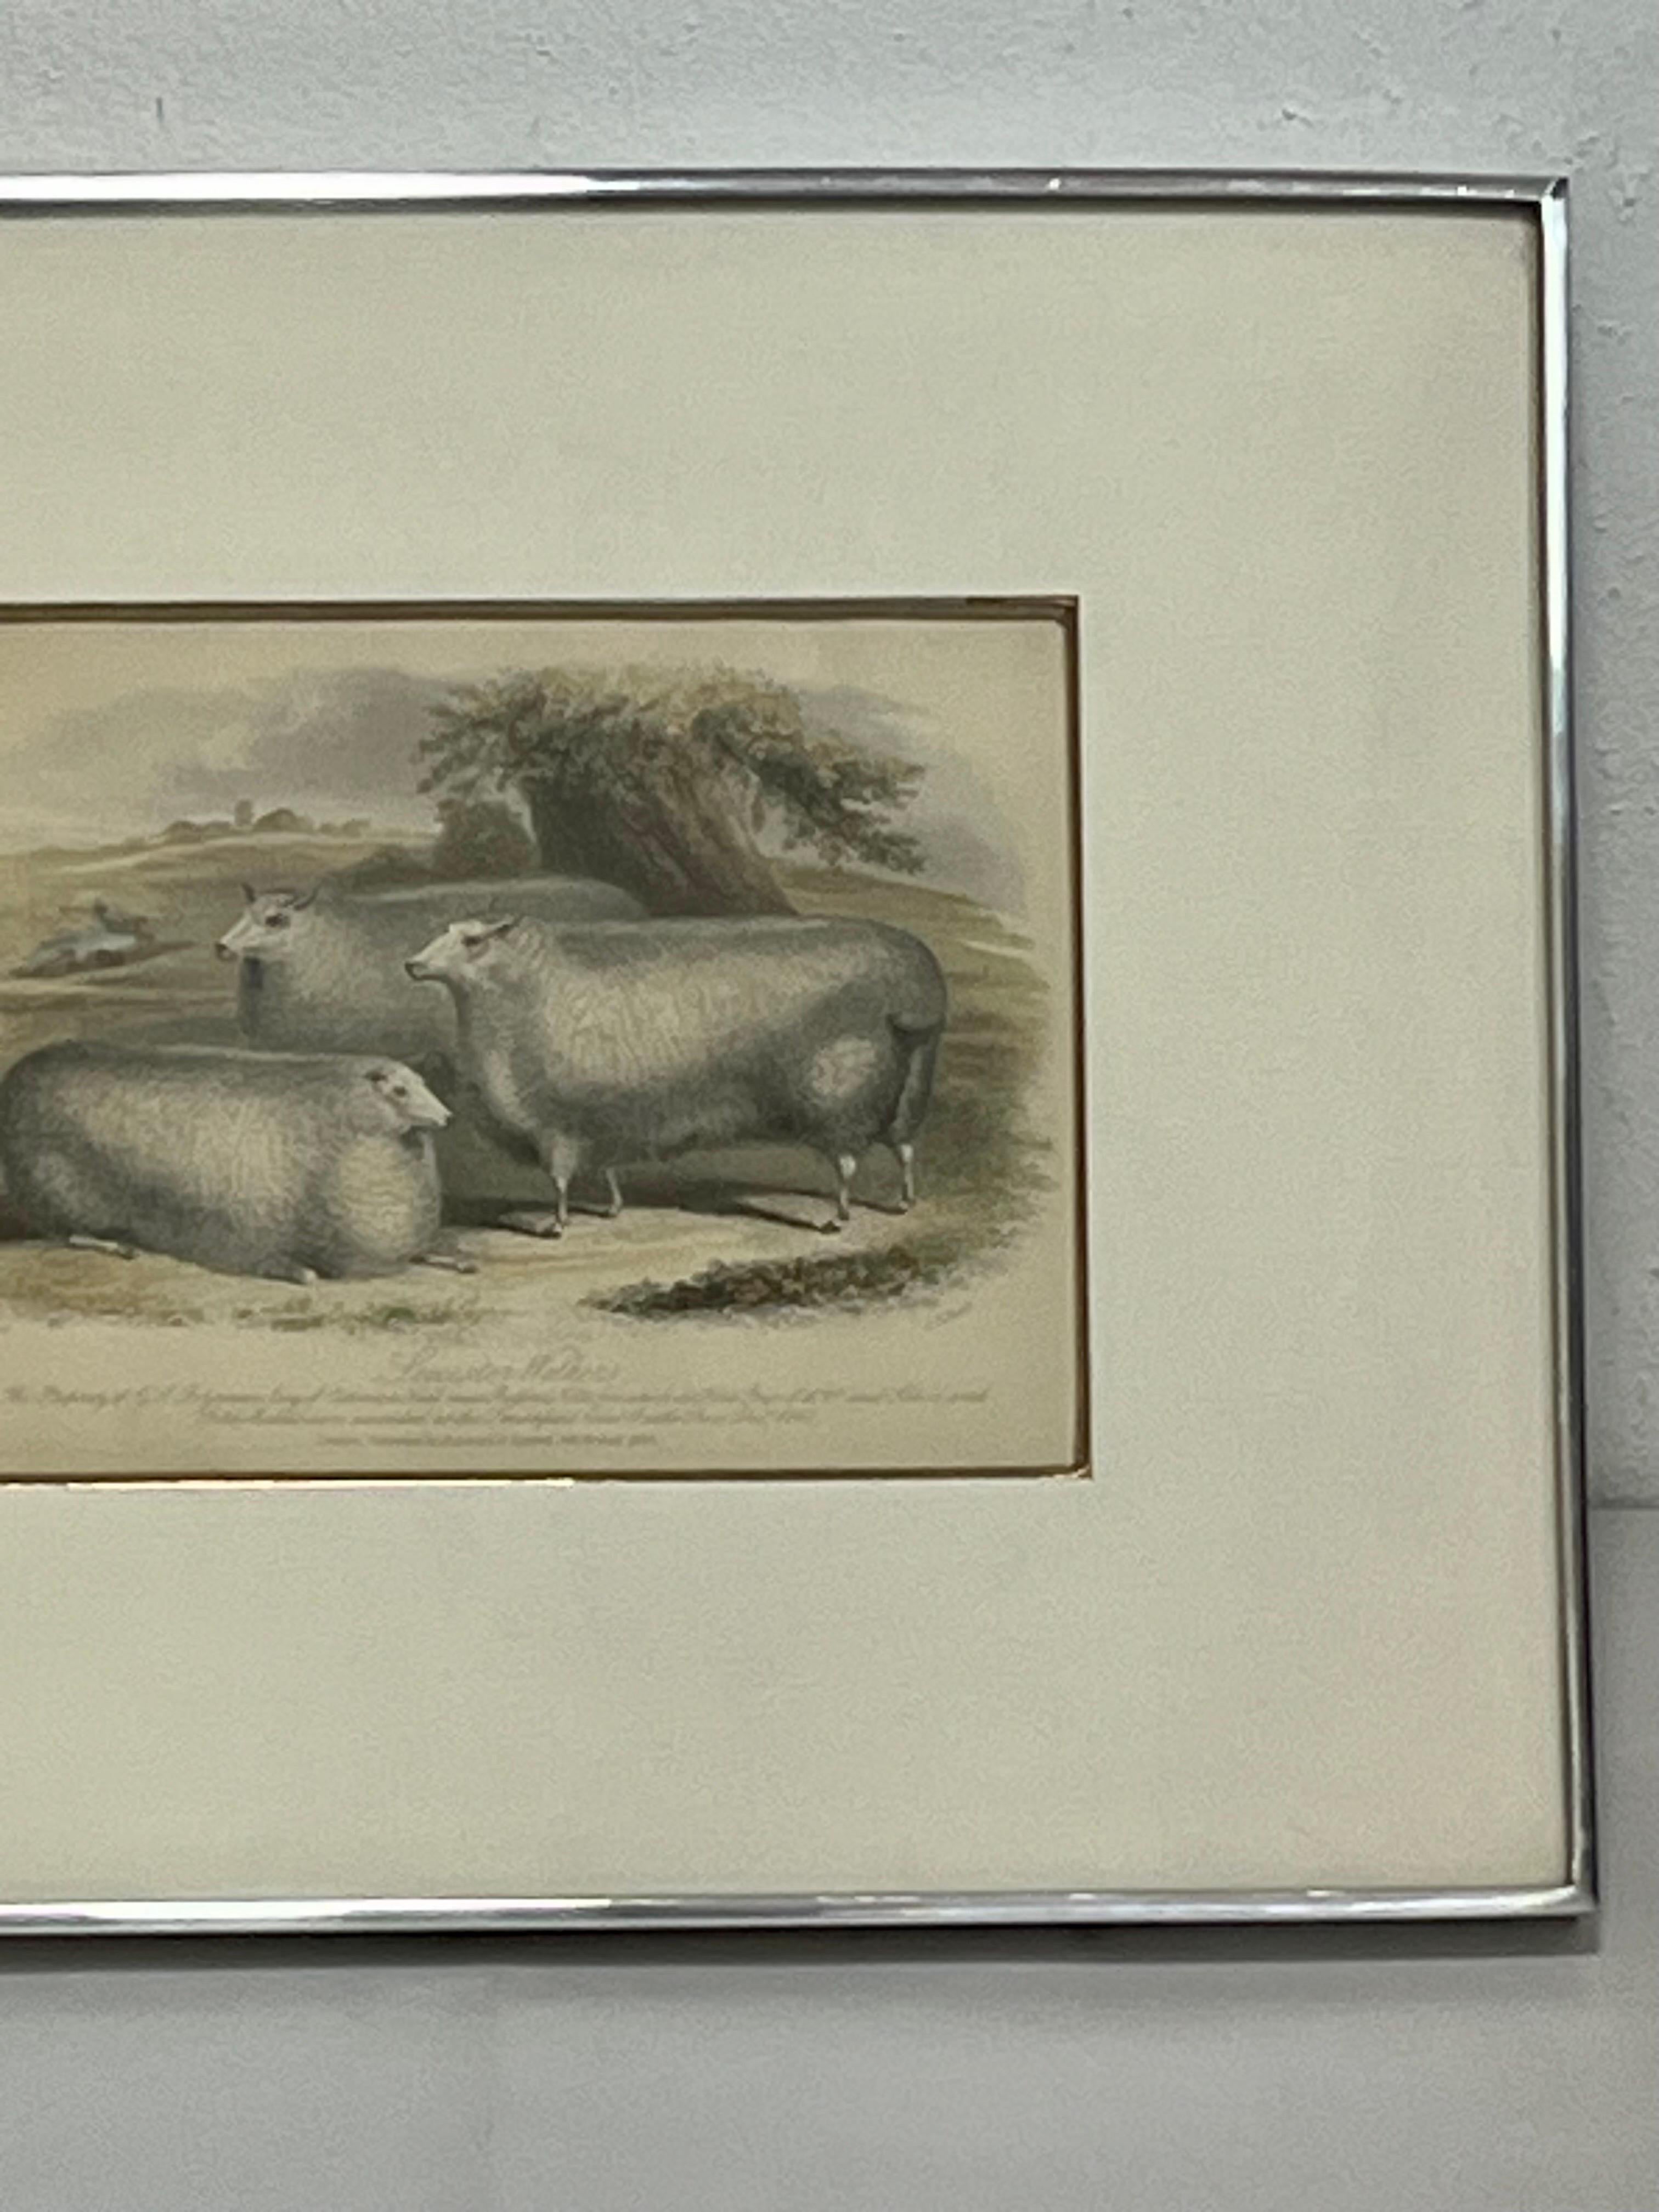 Metal 19th Century British Print by H. Stafford of Leicester Wethers in Kulicke Frame